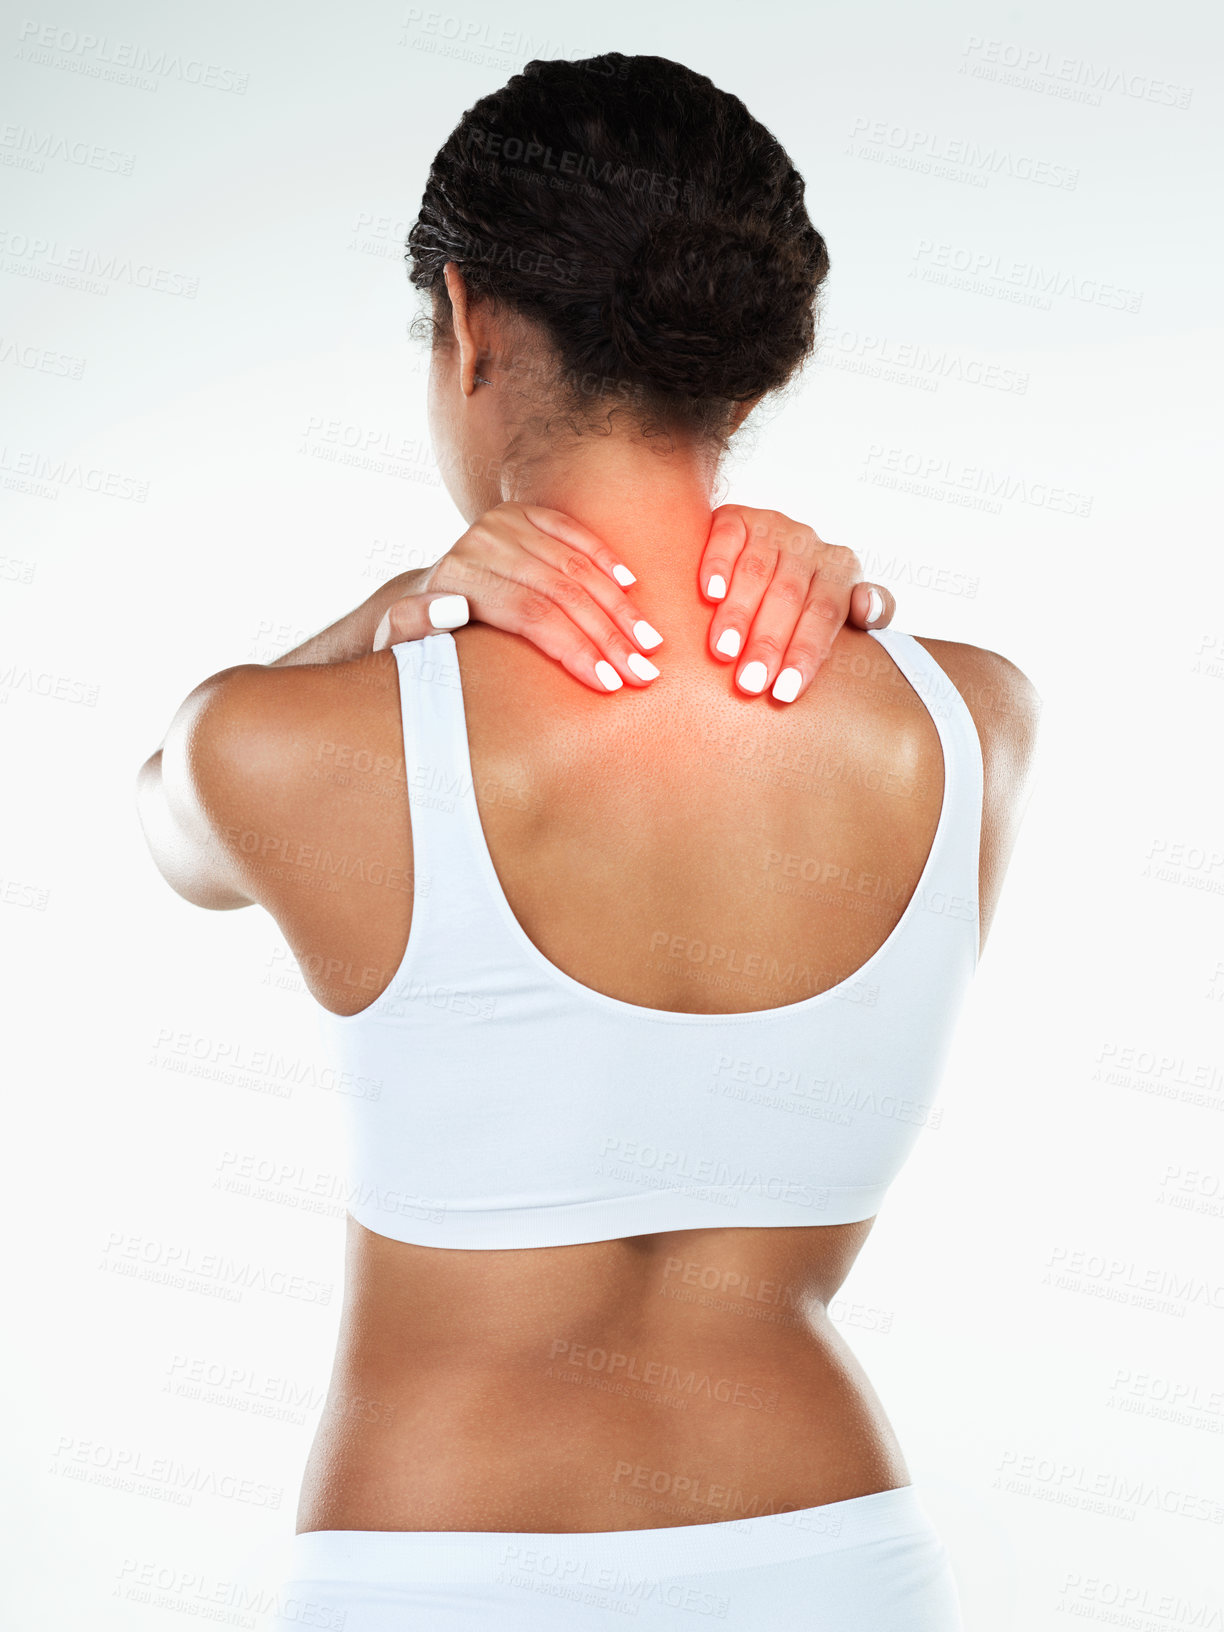 Buy stock photo Rearview studio shot of an unrecognizable woman holding her neck due to pain while standing against a white background